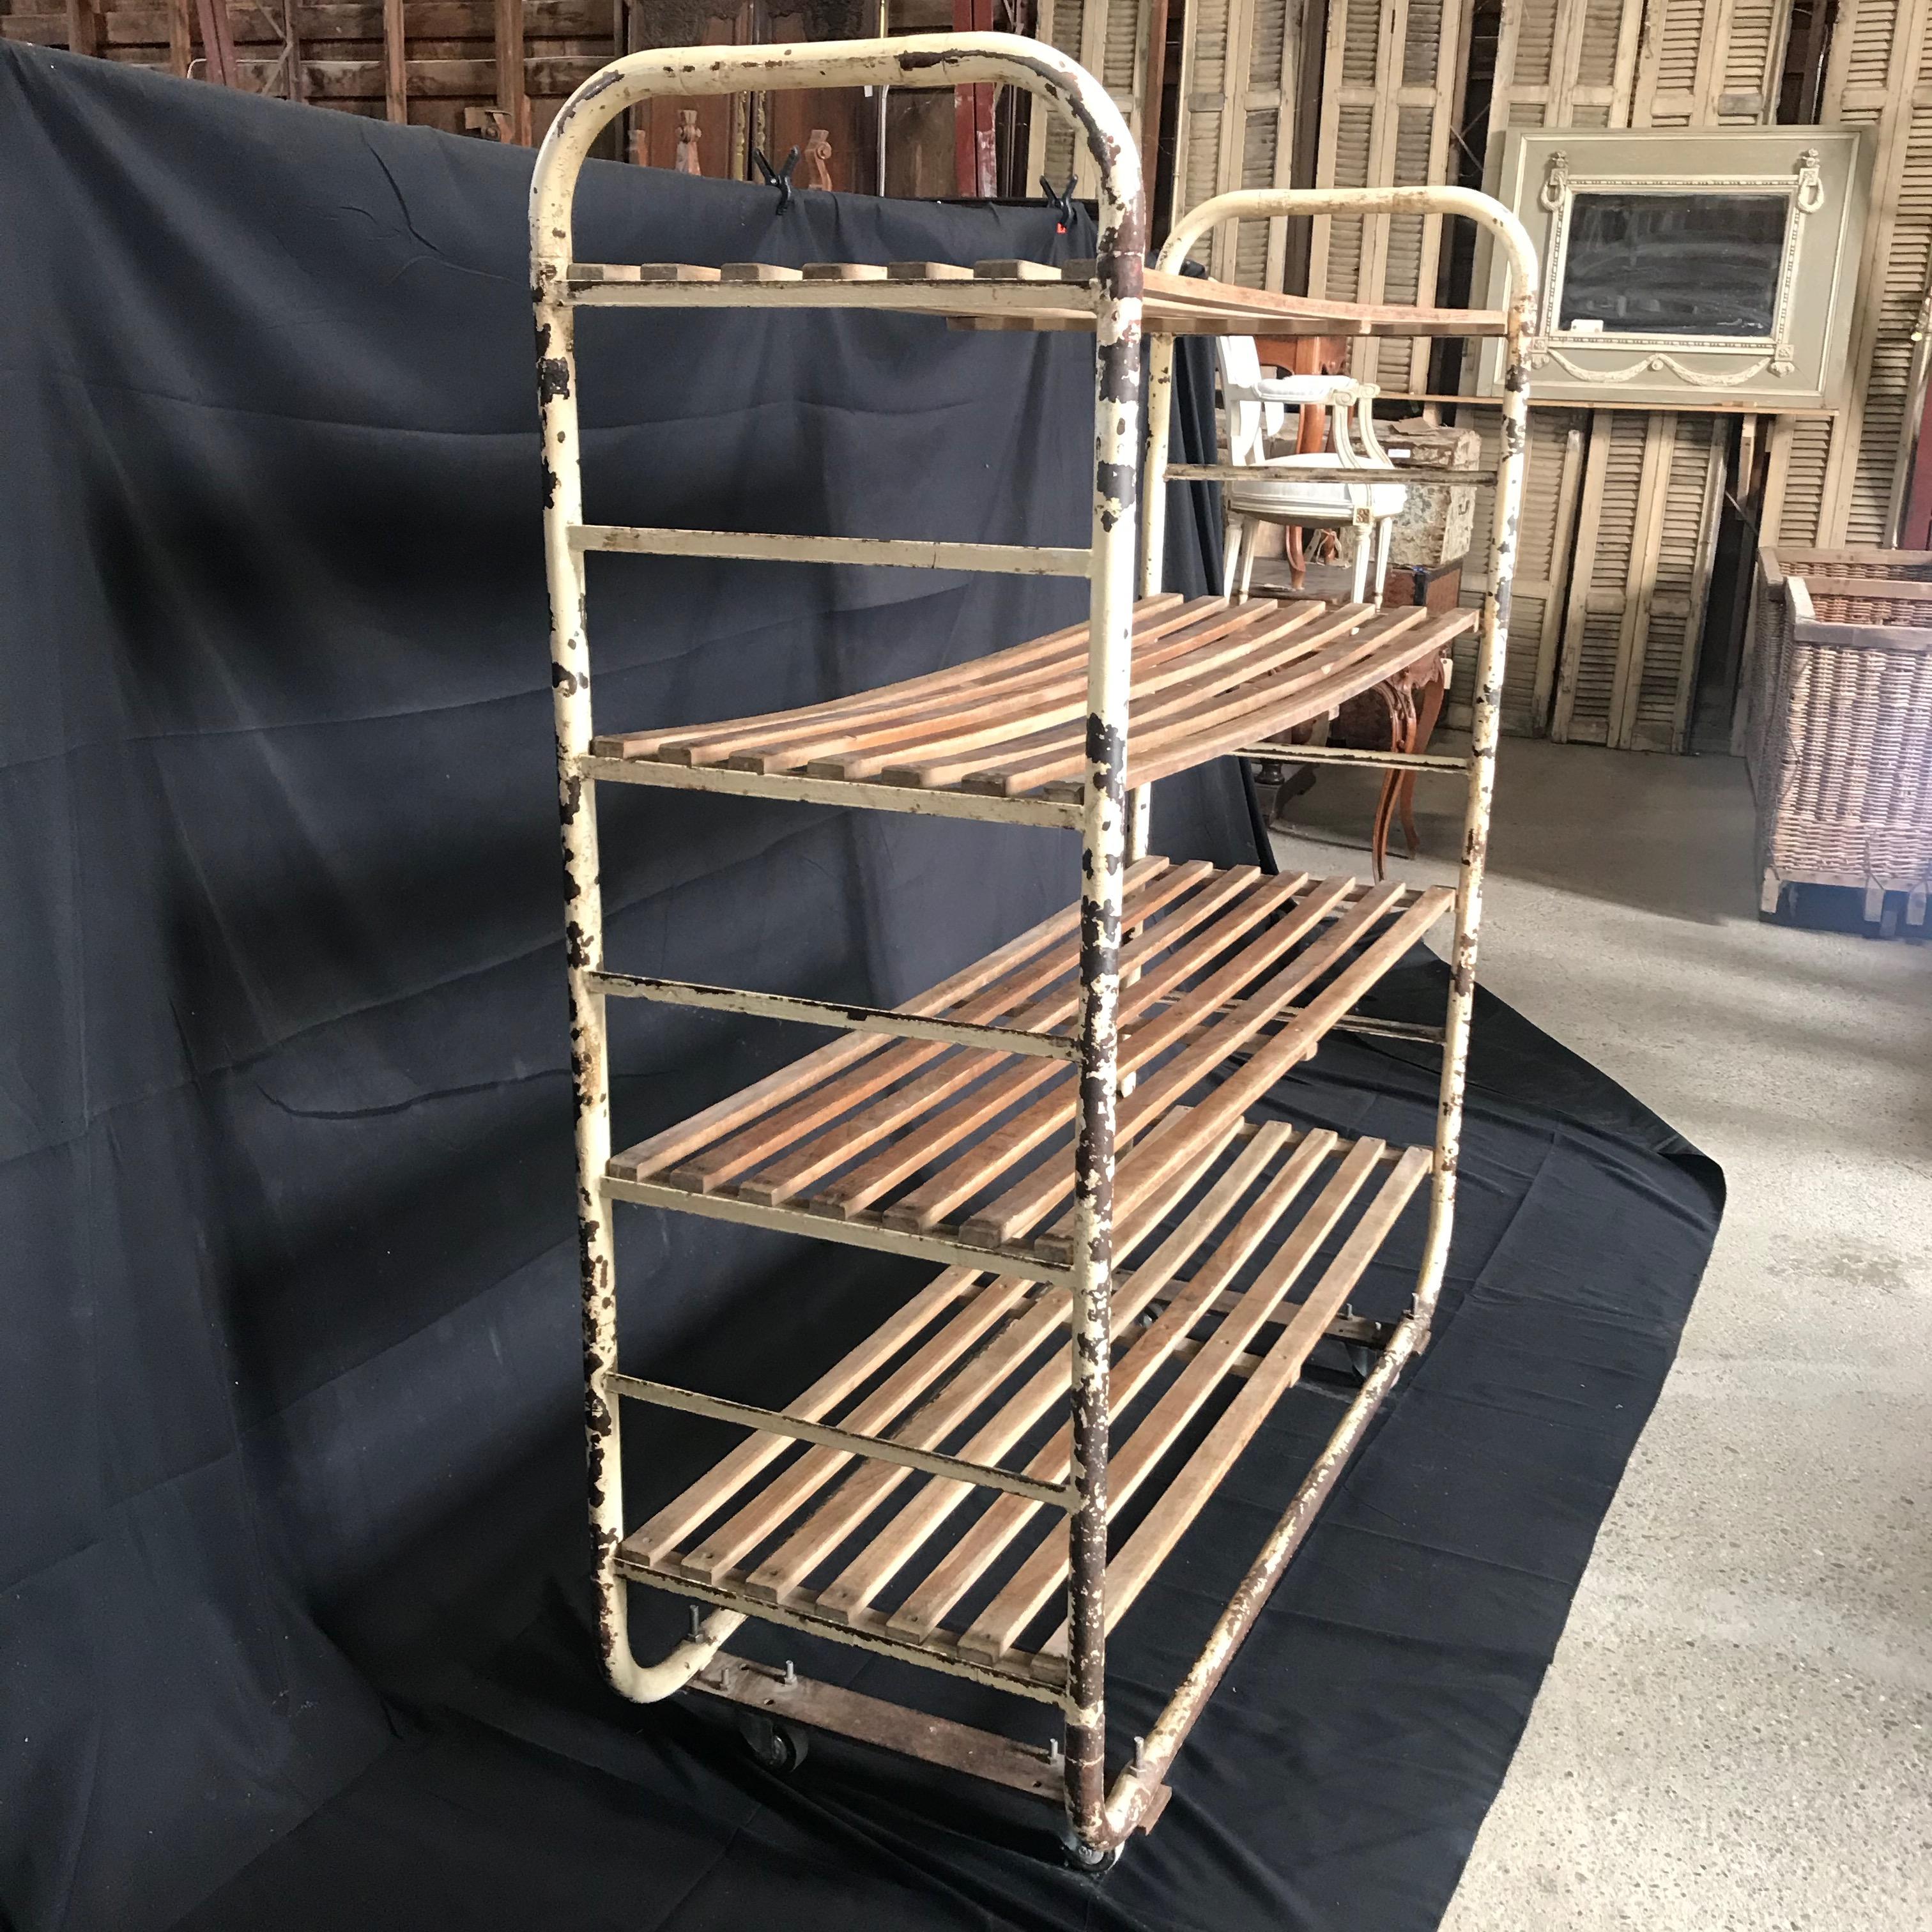 Mid-20th Century Industrial Chic French Bakers Rack Shelving Unit